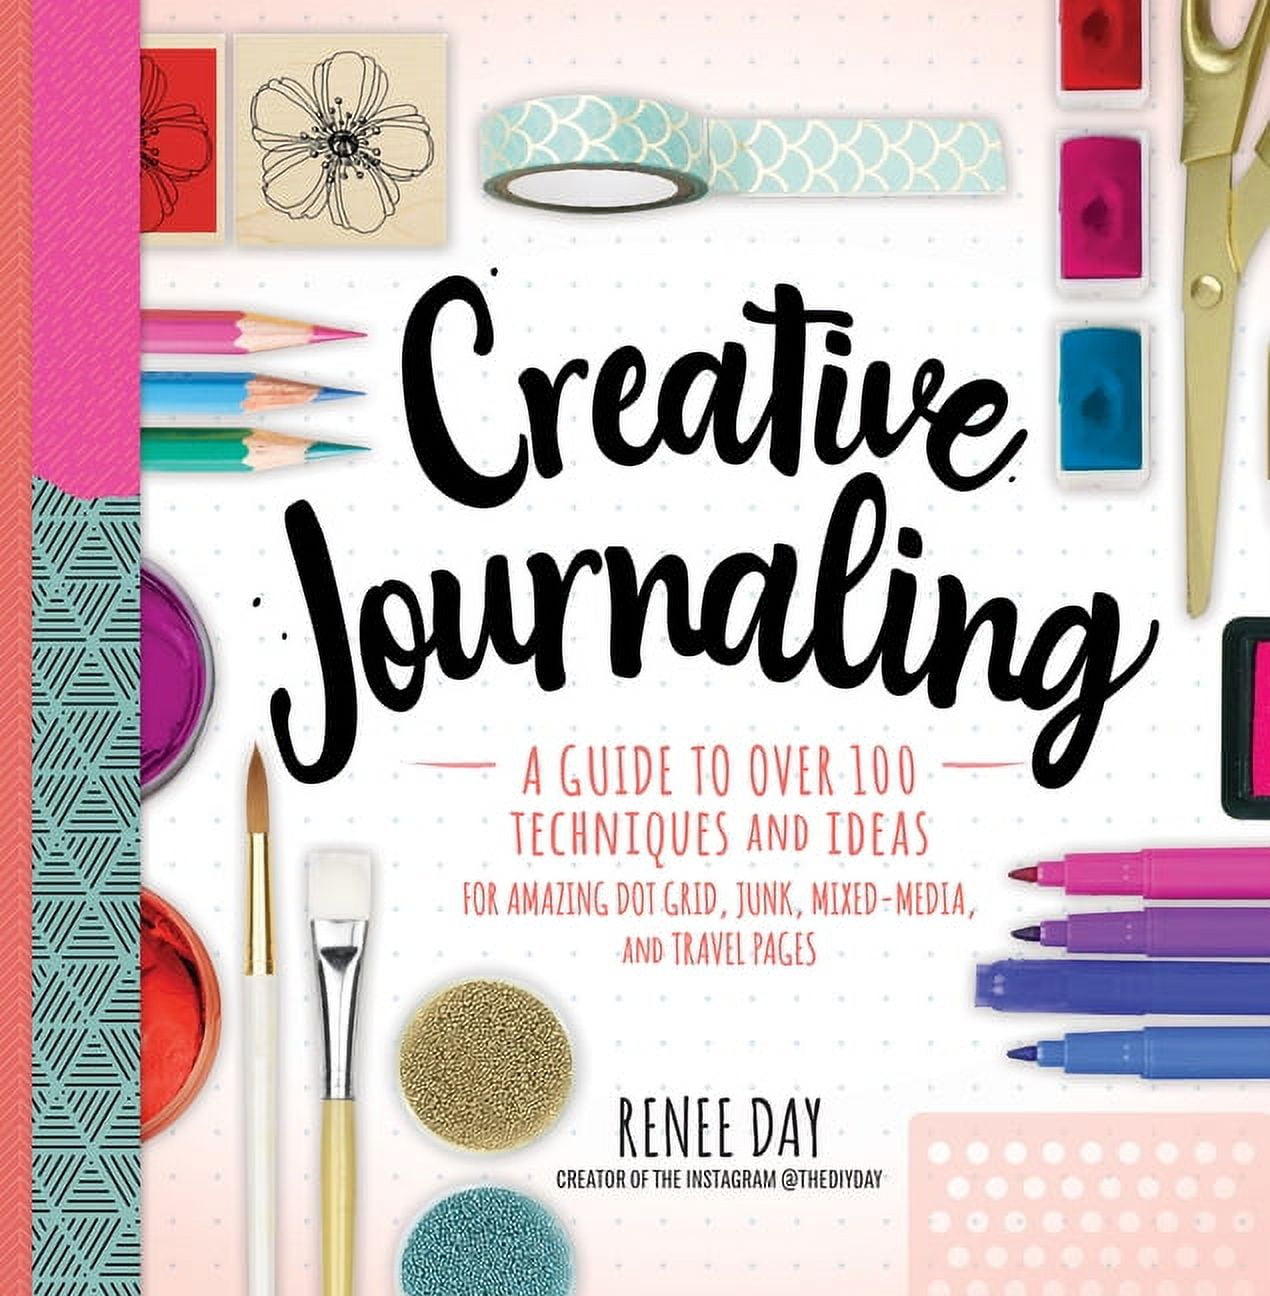 Creative and unexpected ways of journaling